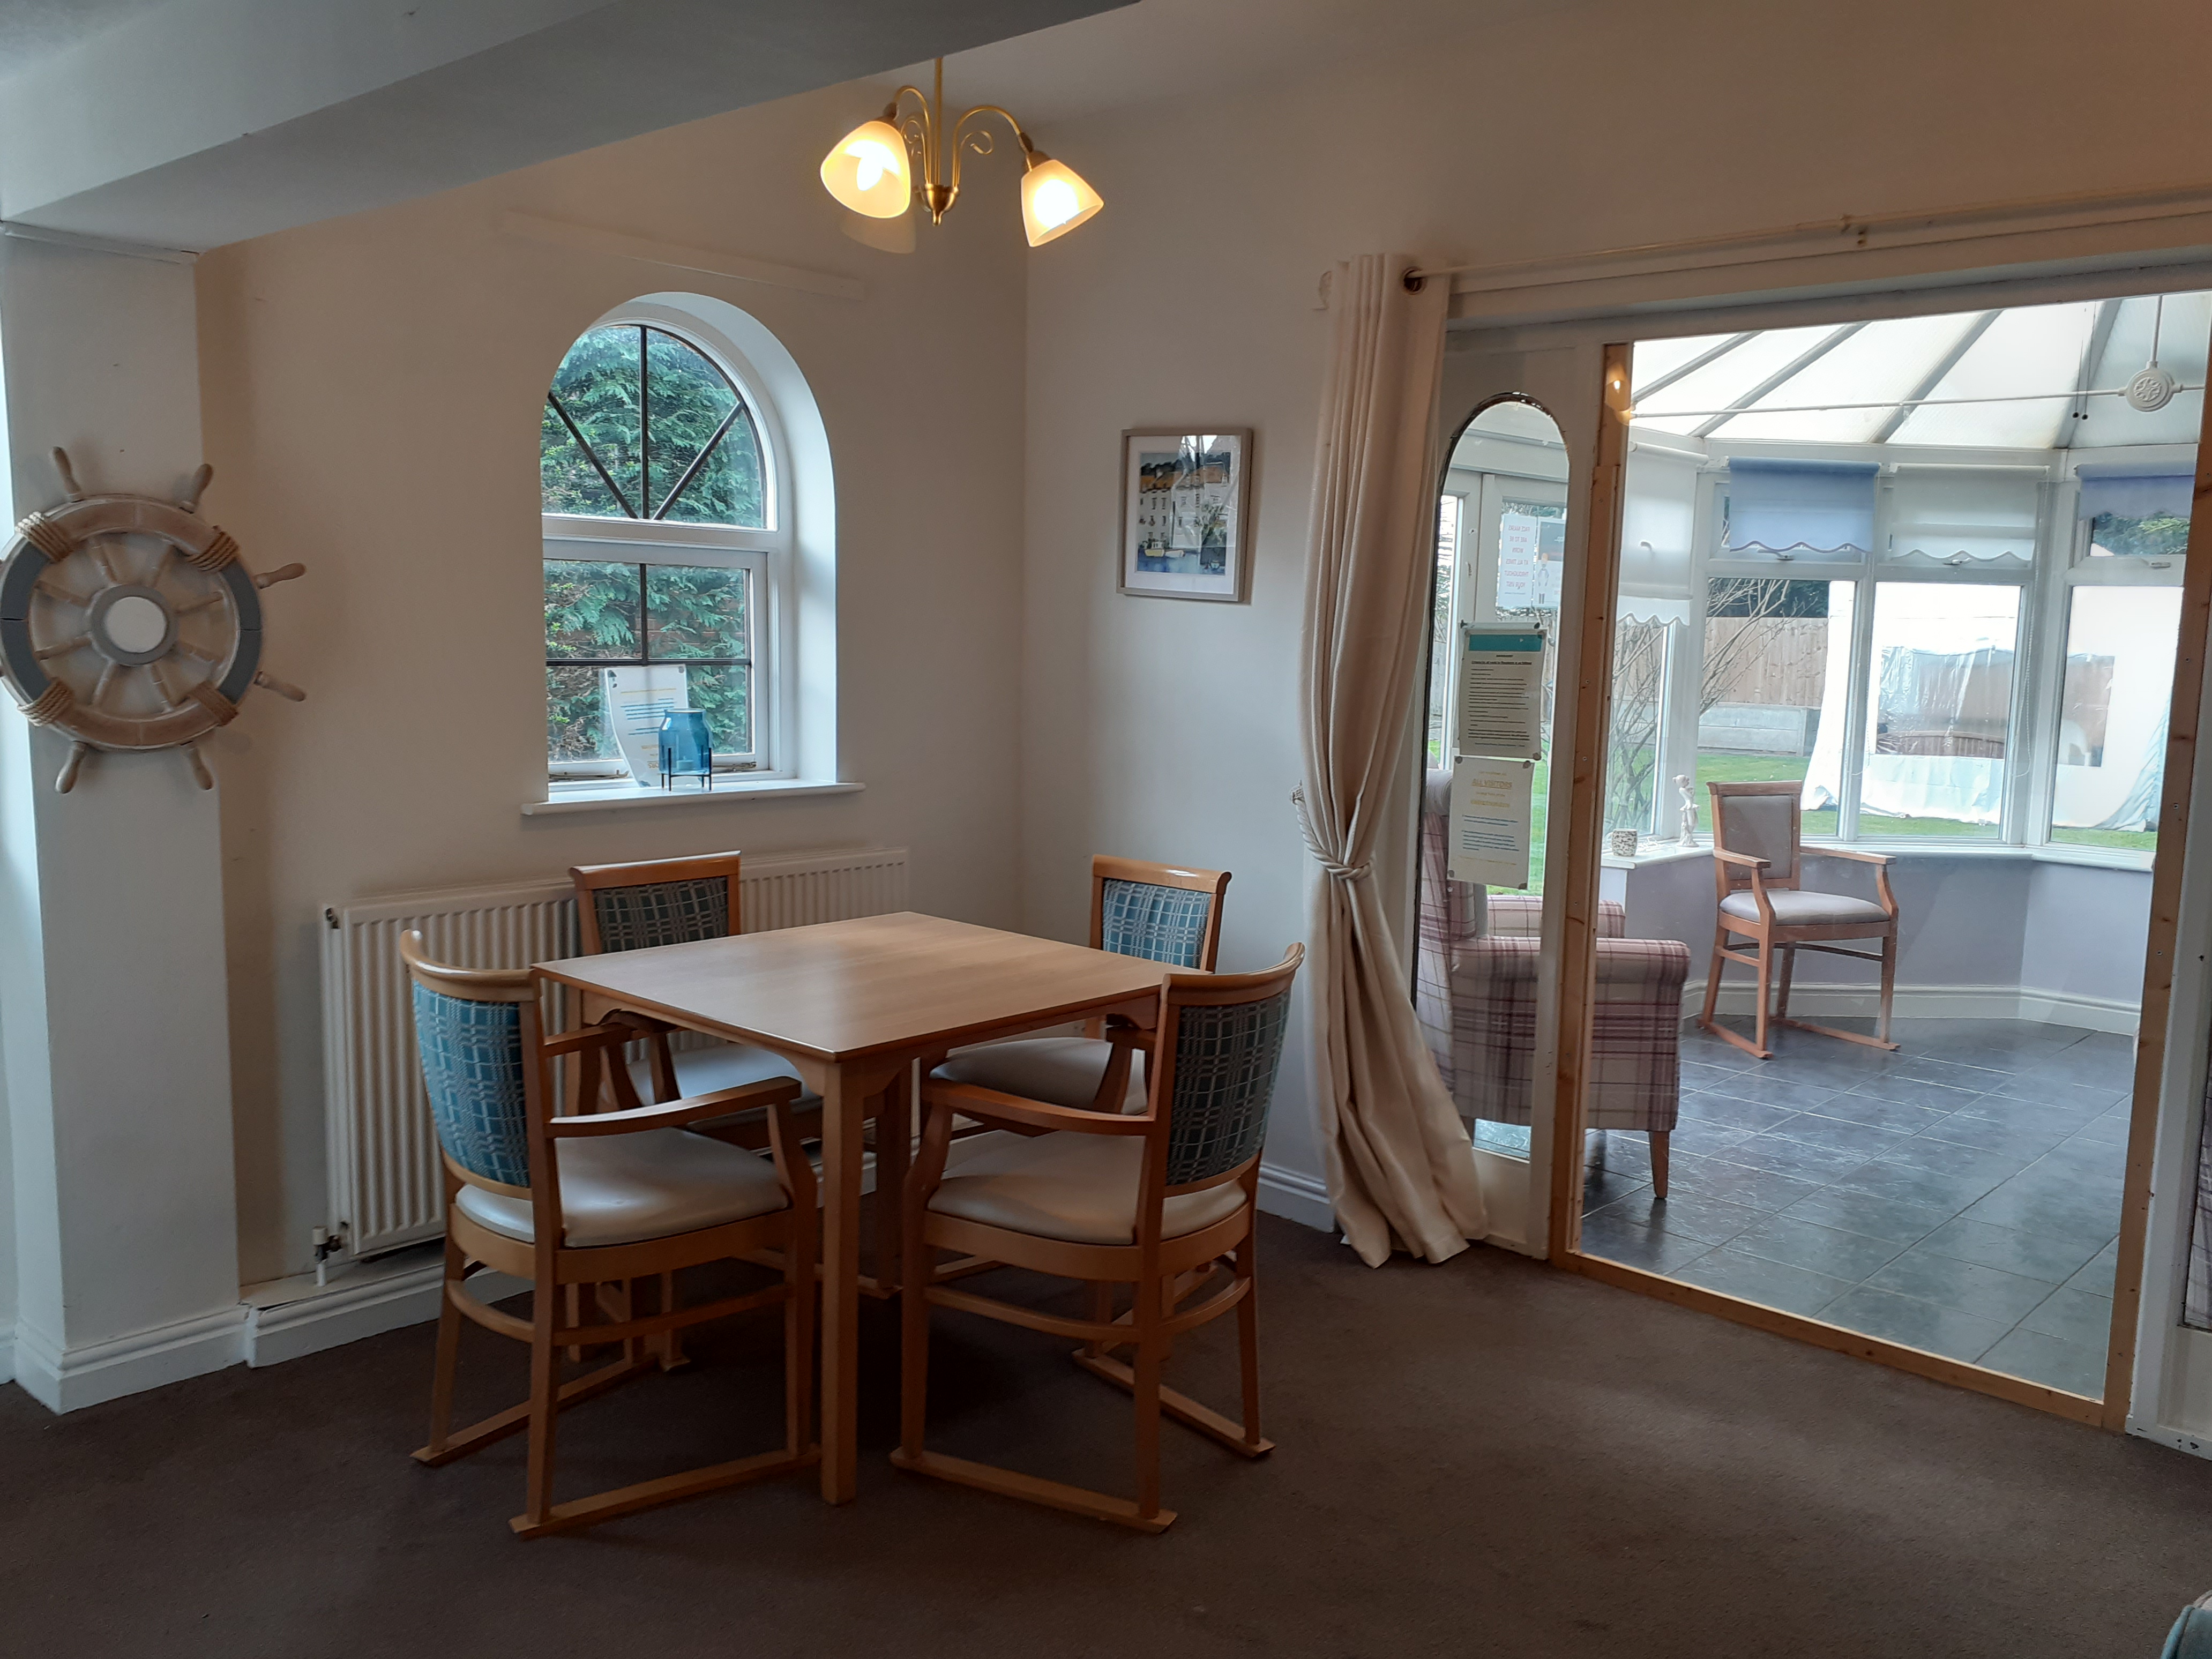 Stourport open day 3 - living rooms and conservatory.jpg